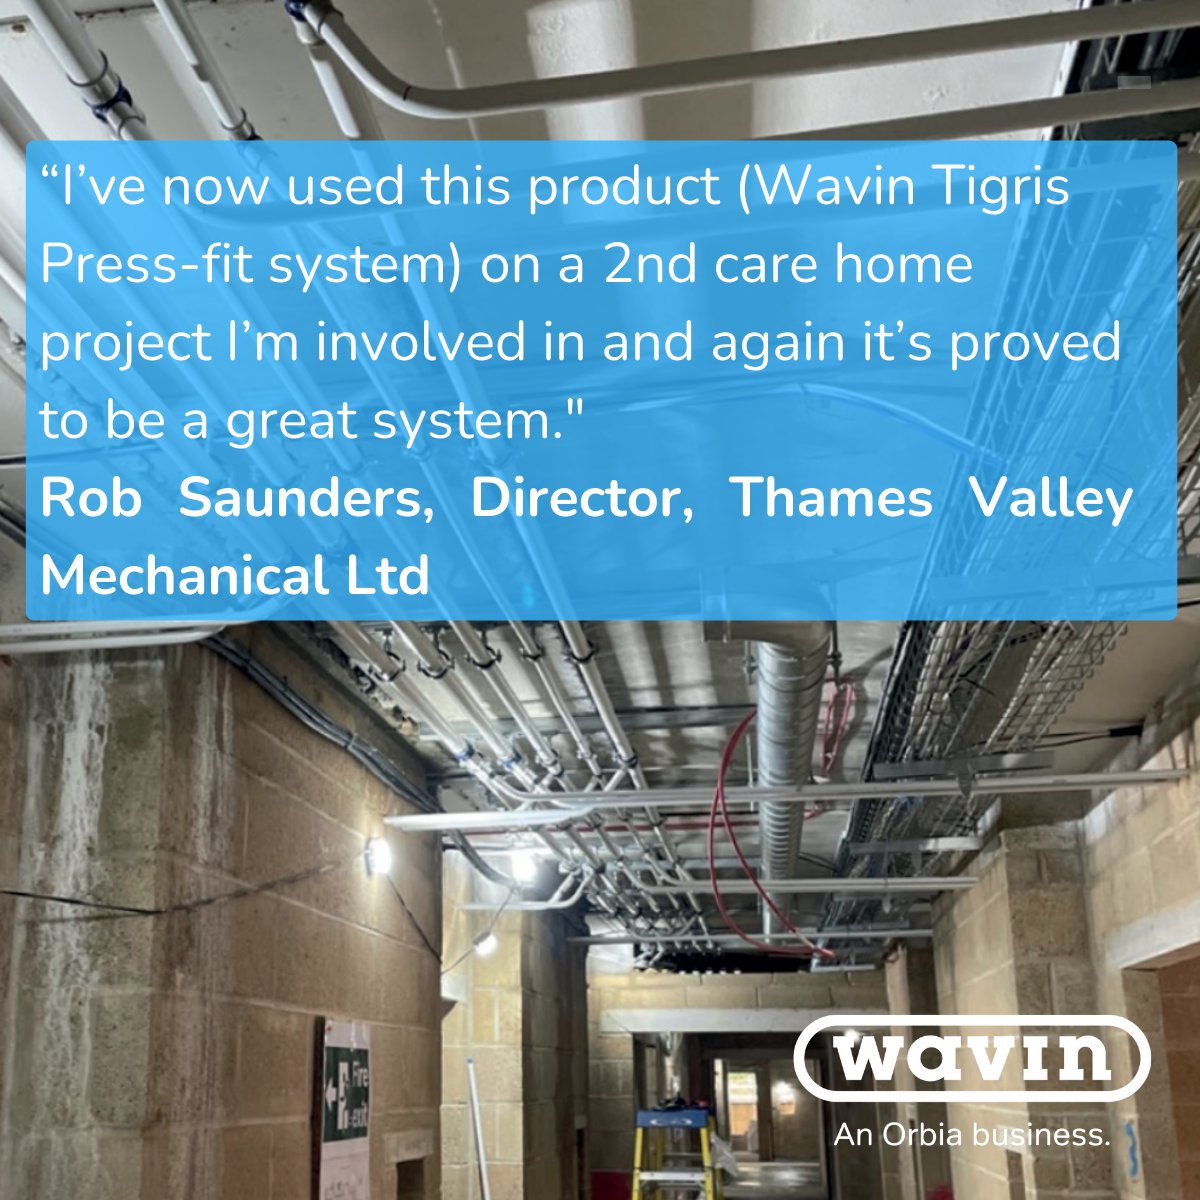 Our above ground systems for commercial projects are cost effective, easy to install and designed to work together for a single source solution. Find out more about Tigris K5, our innovative press-fit pipe system here hubs.la/Q02wNYsq0
#commercialconstruction #plumbing